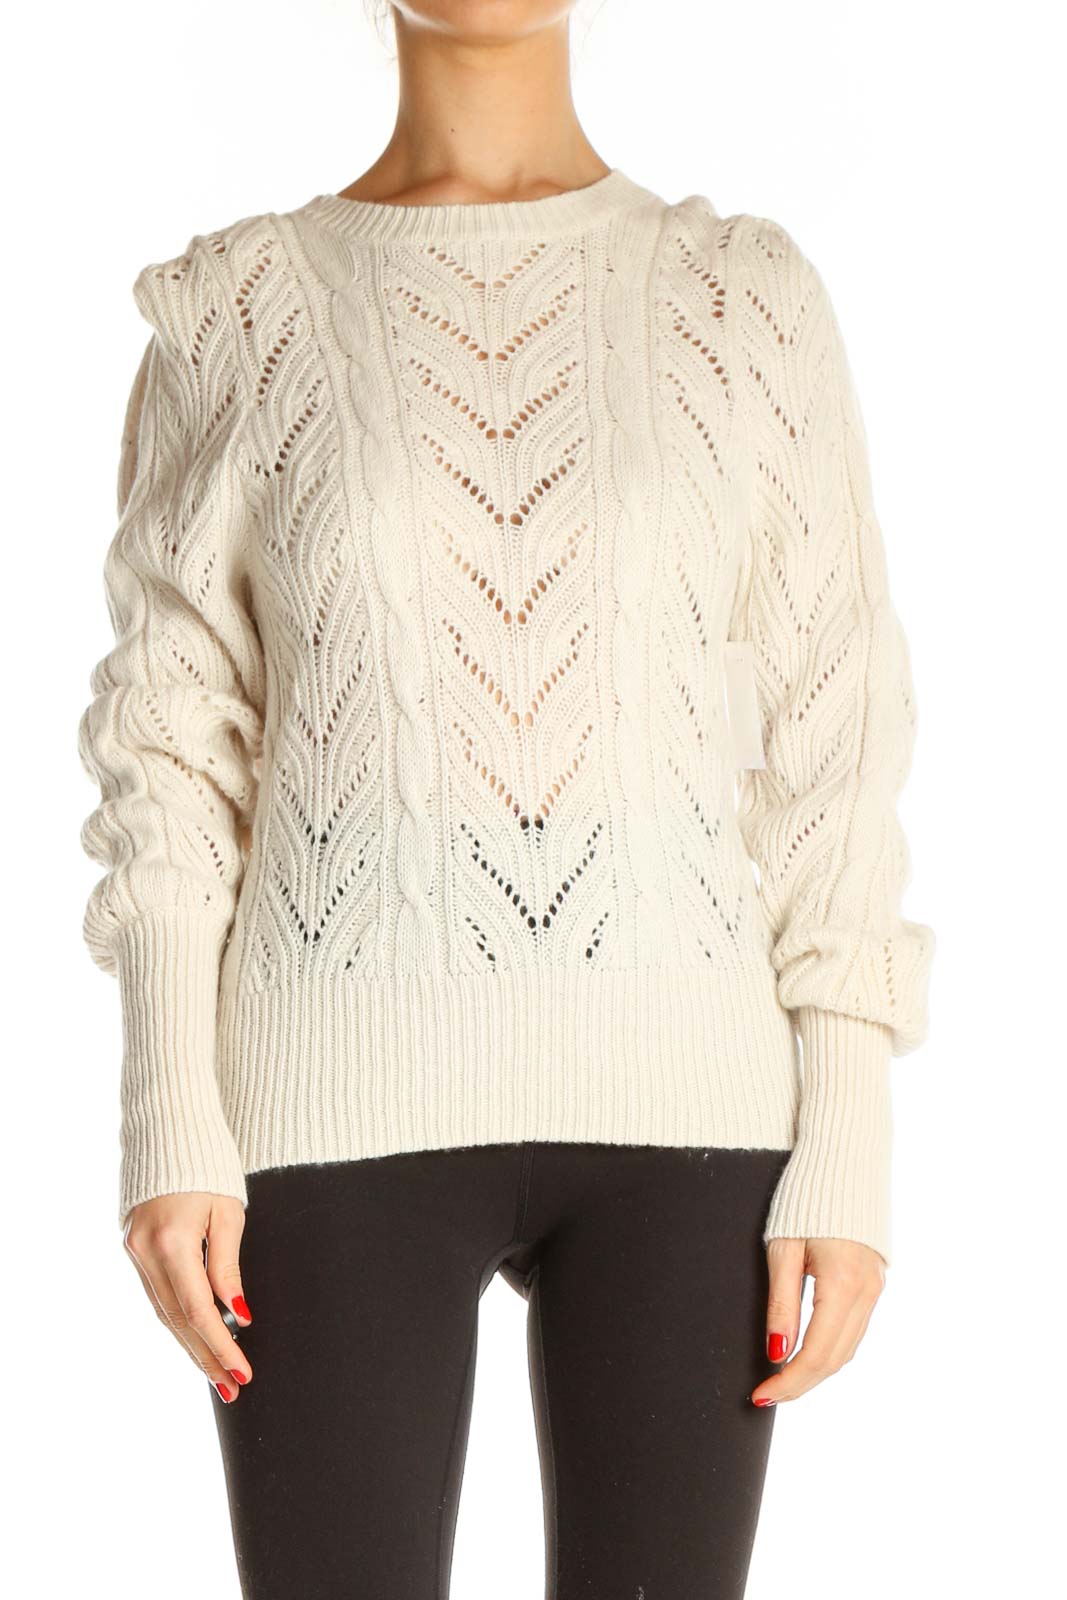 Beige Textured All Day Wear Sweater Front